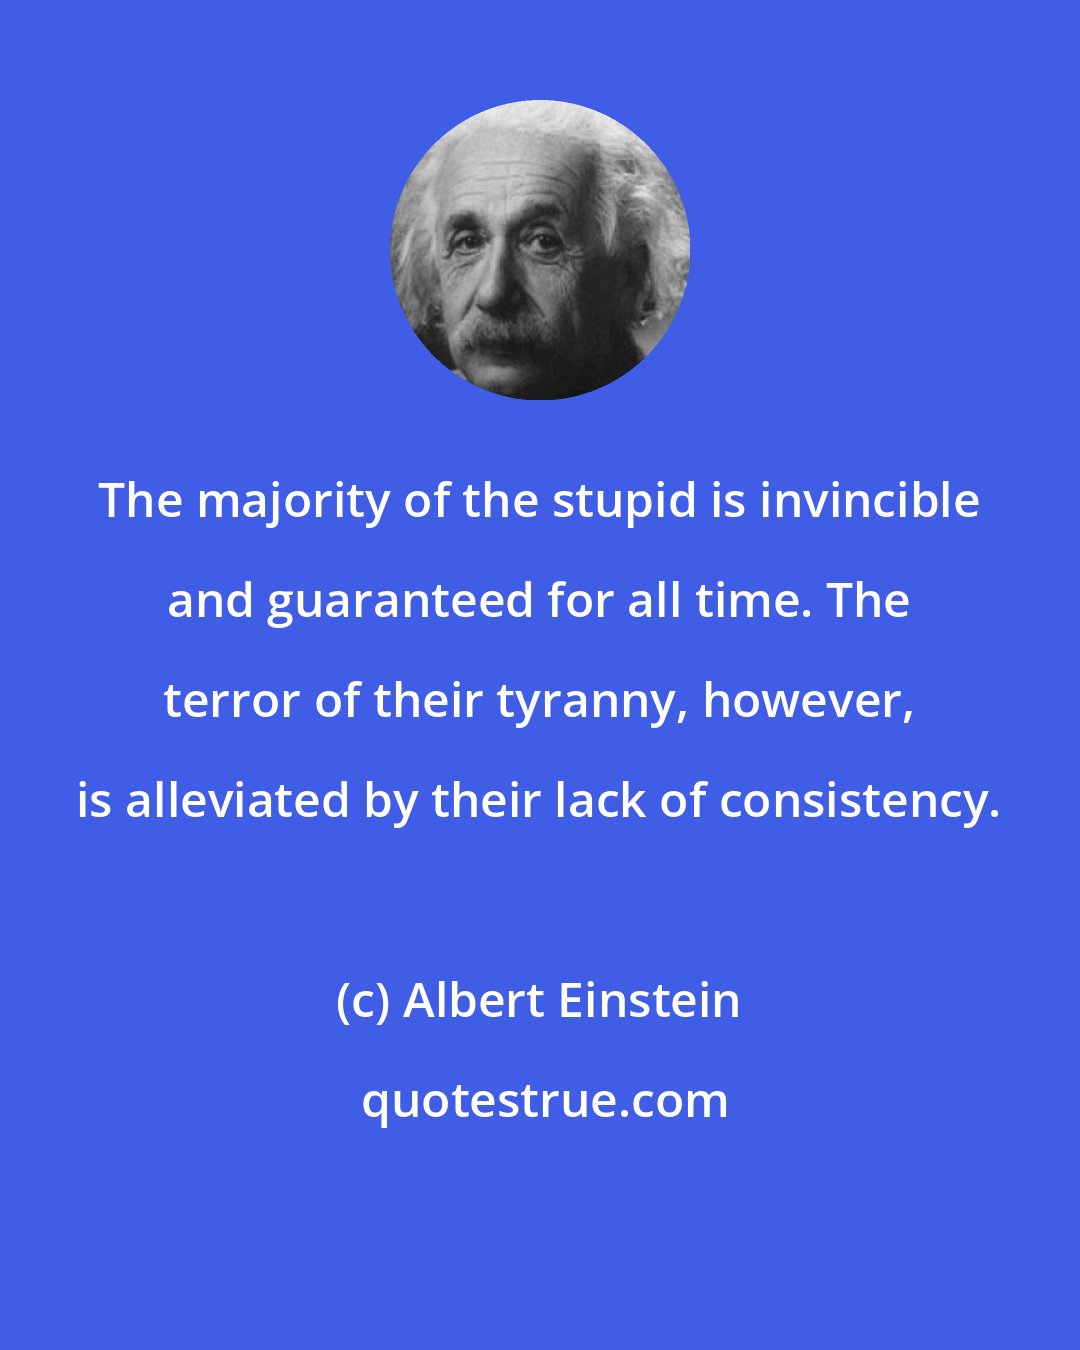 Albert Einstein: The majority of the stupid is invincible and guaranteed for all time. The terror of their tyranny, however, is alleviated by their lack of consistency.